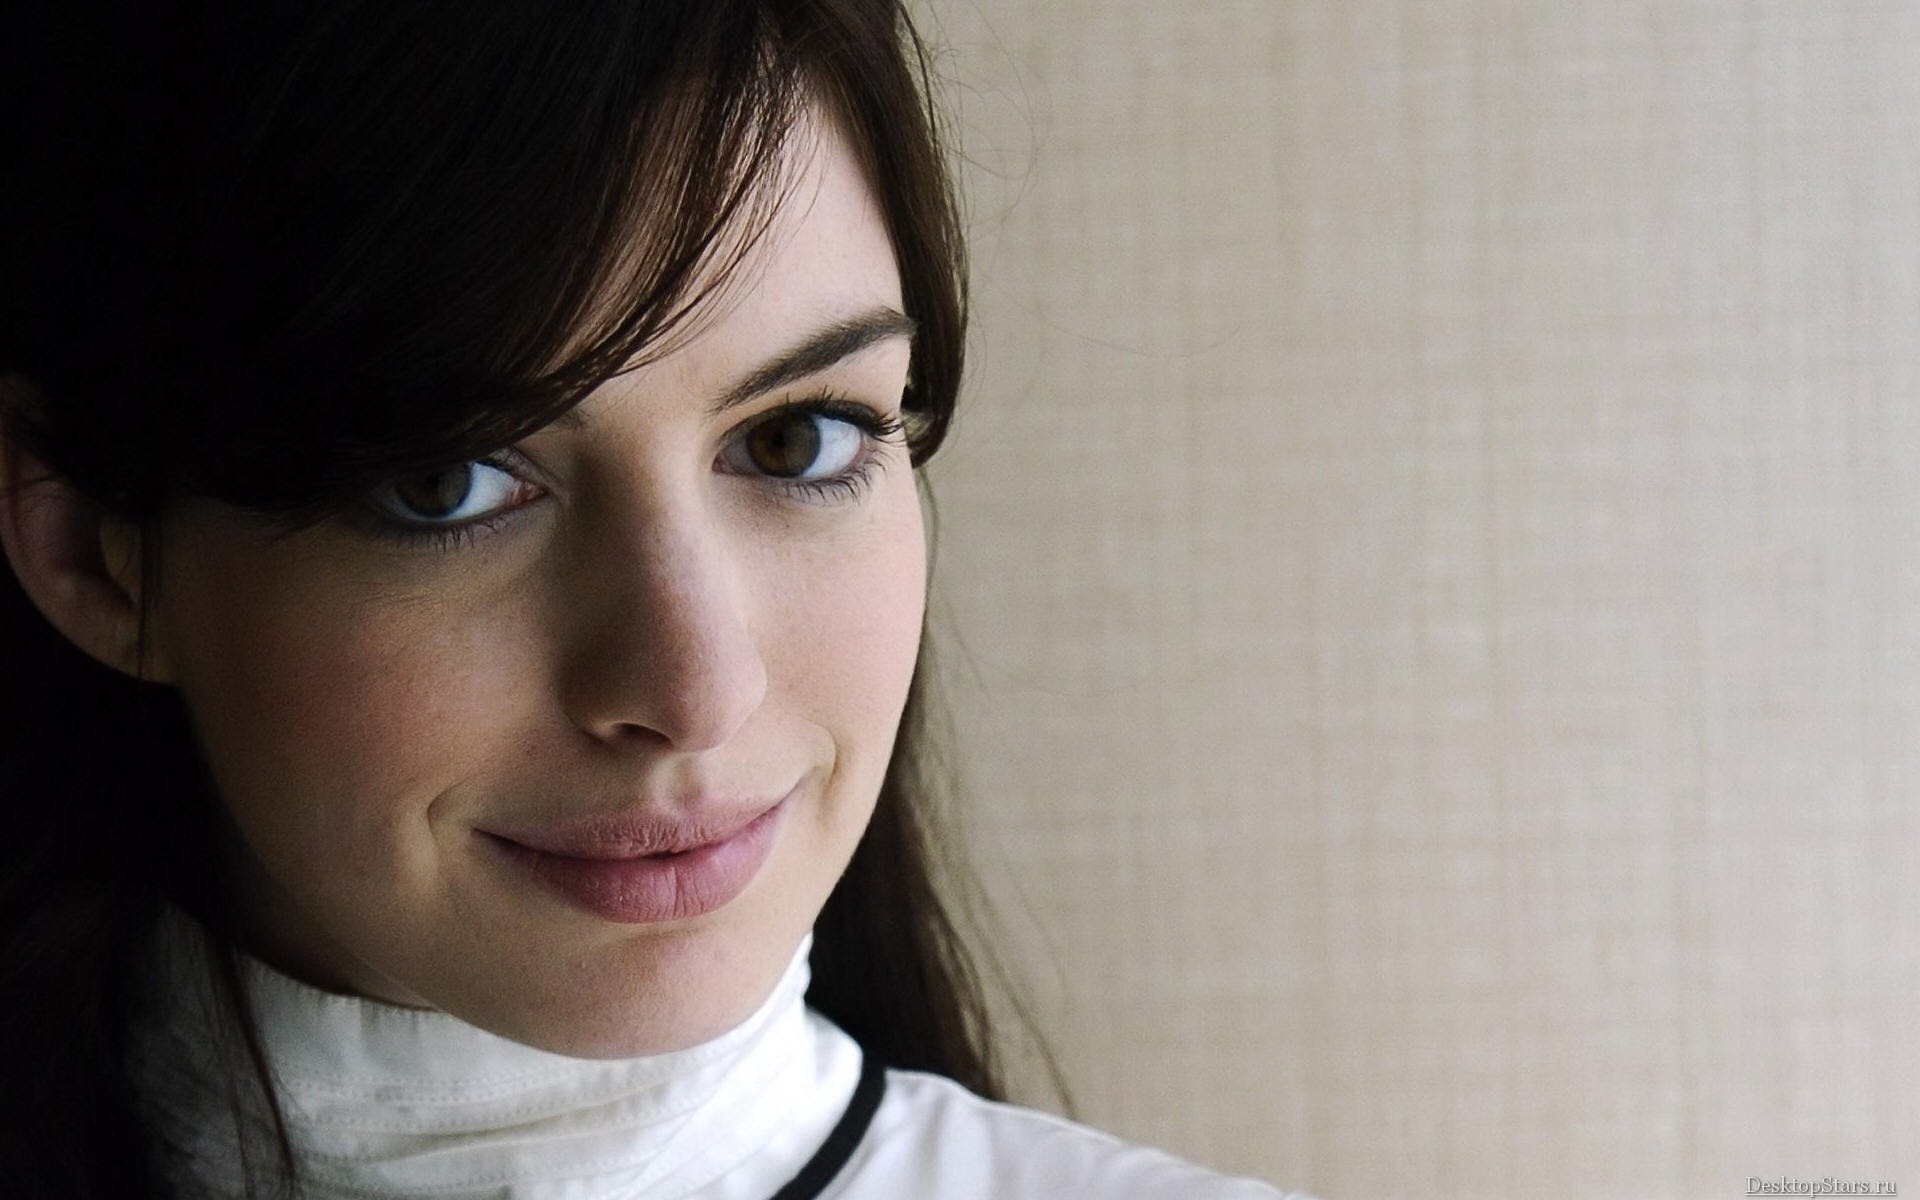 Anne Hathaway #004 - 1920x1200 Wallpapers Pictures Photos Images